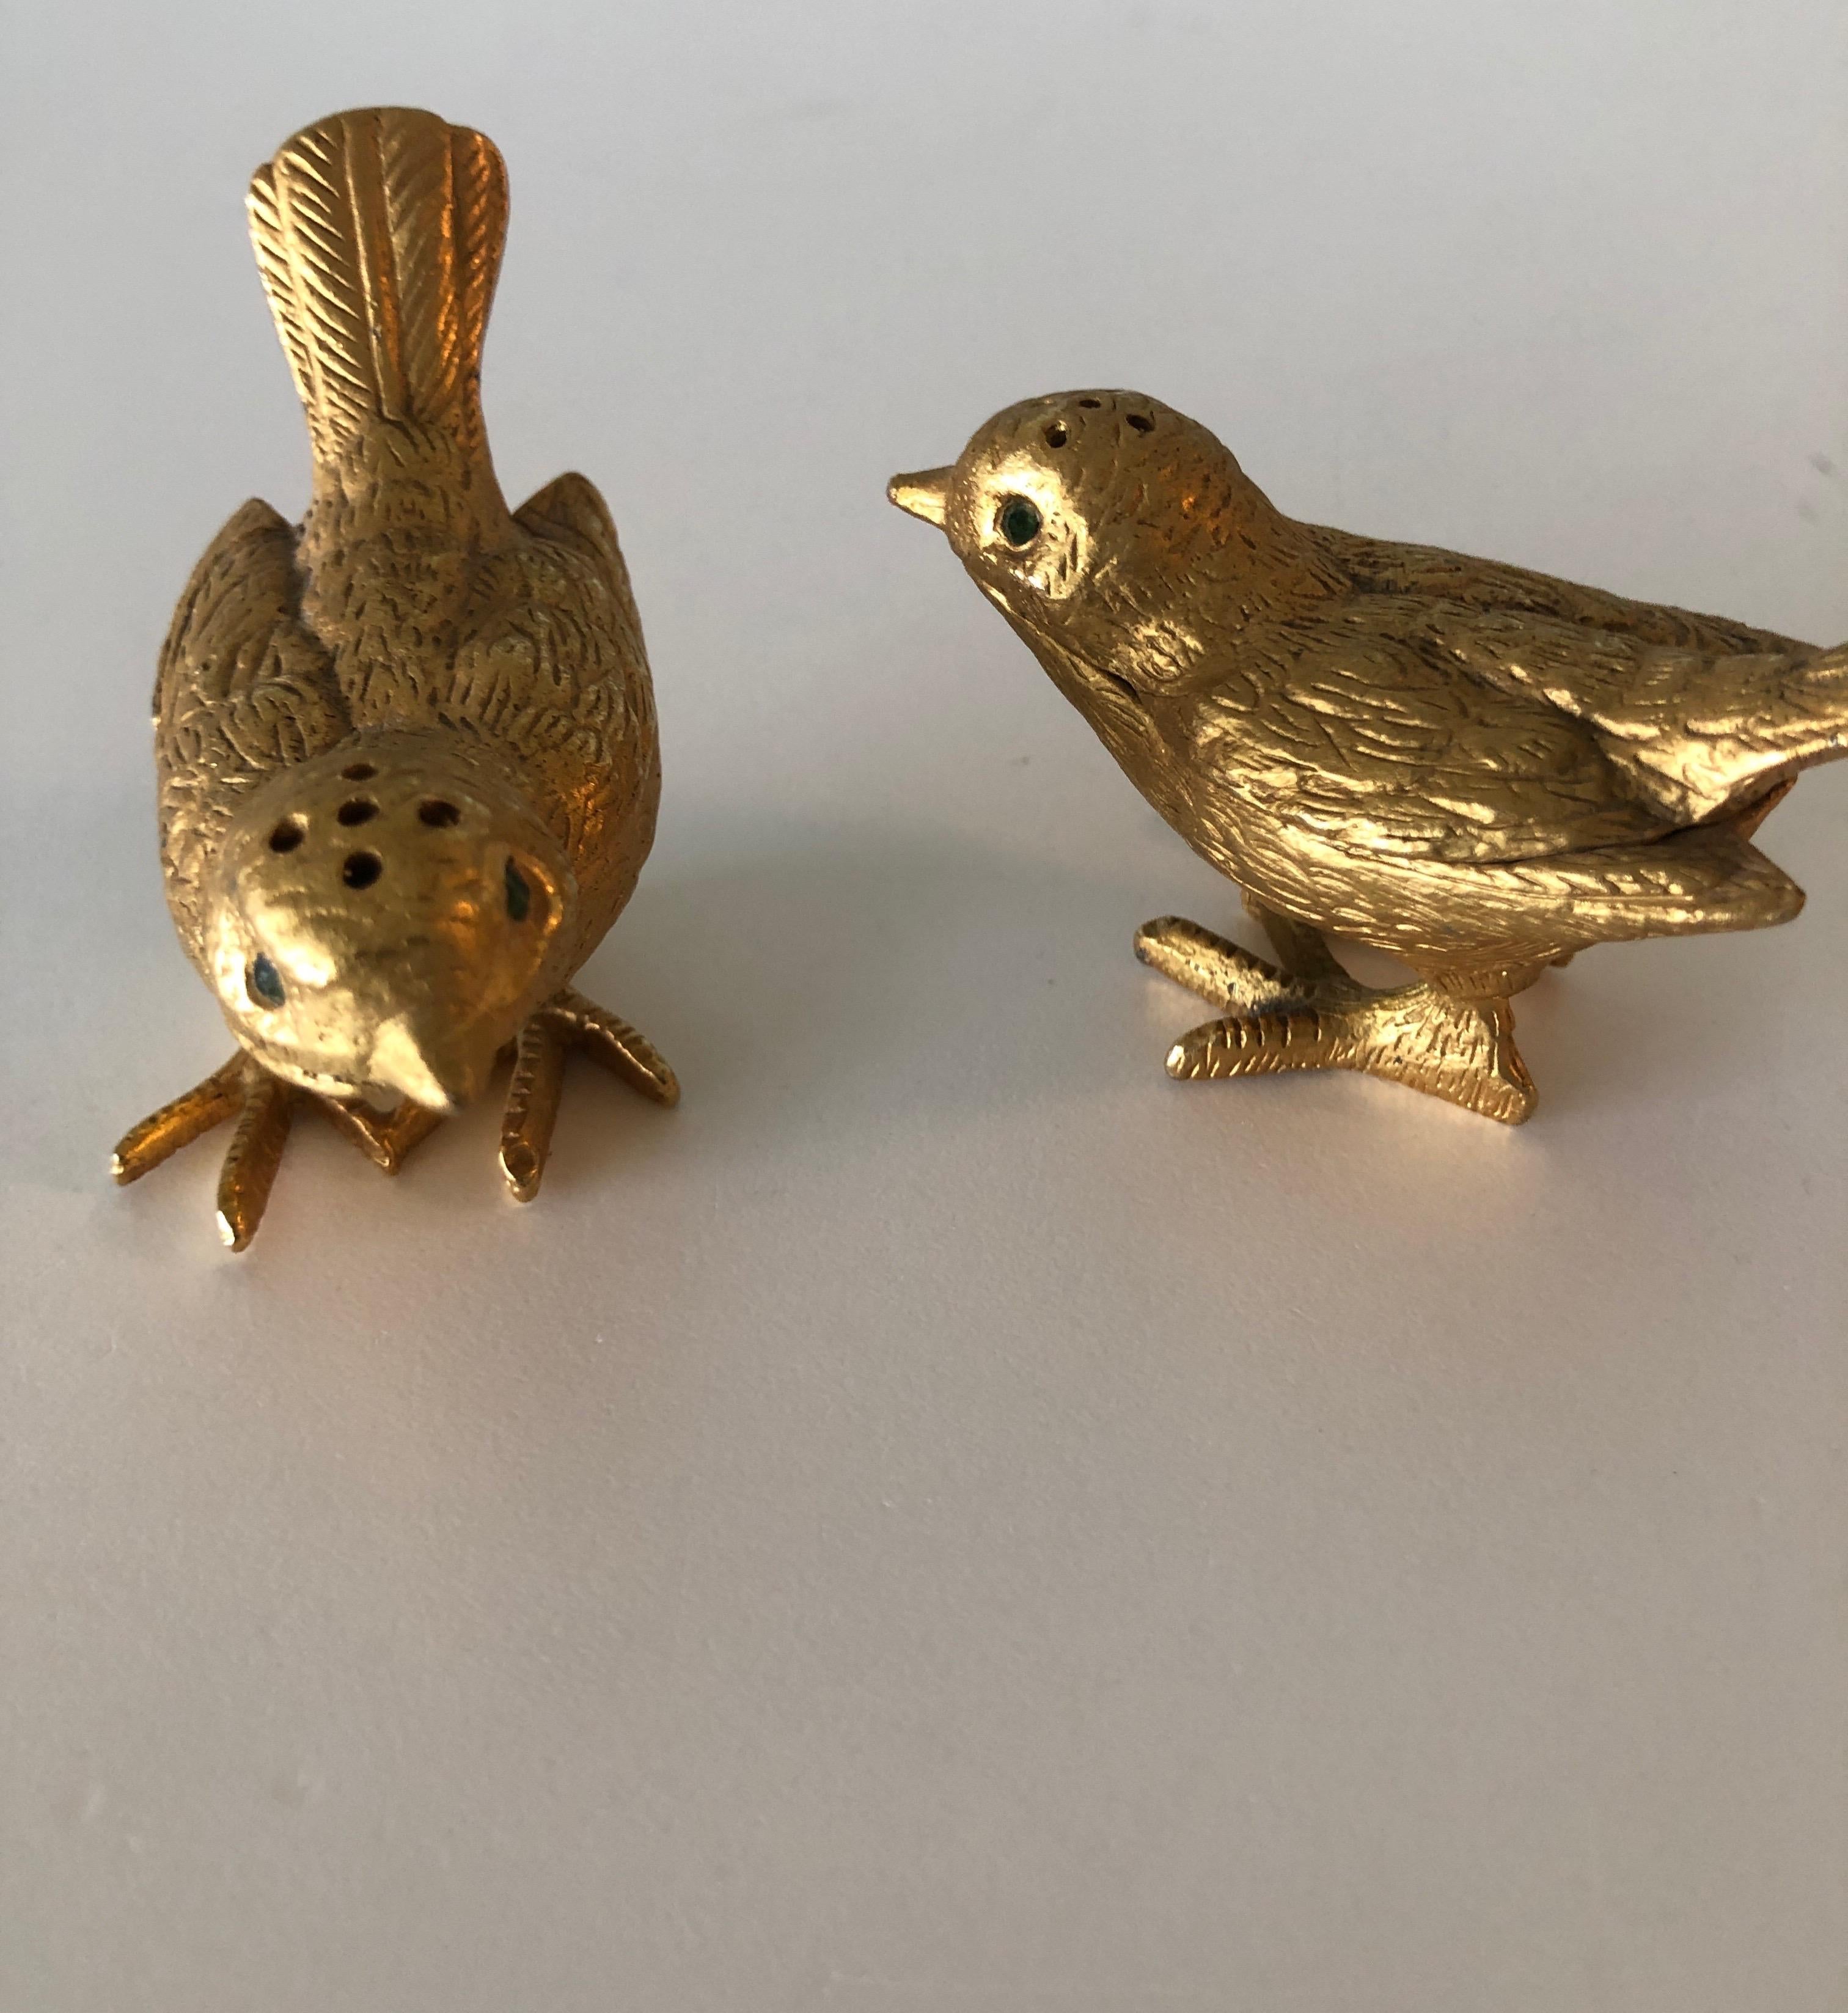 Hand-Crafted Pair of Gold Plated Birds Salt and Pepper Shakers